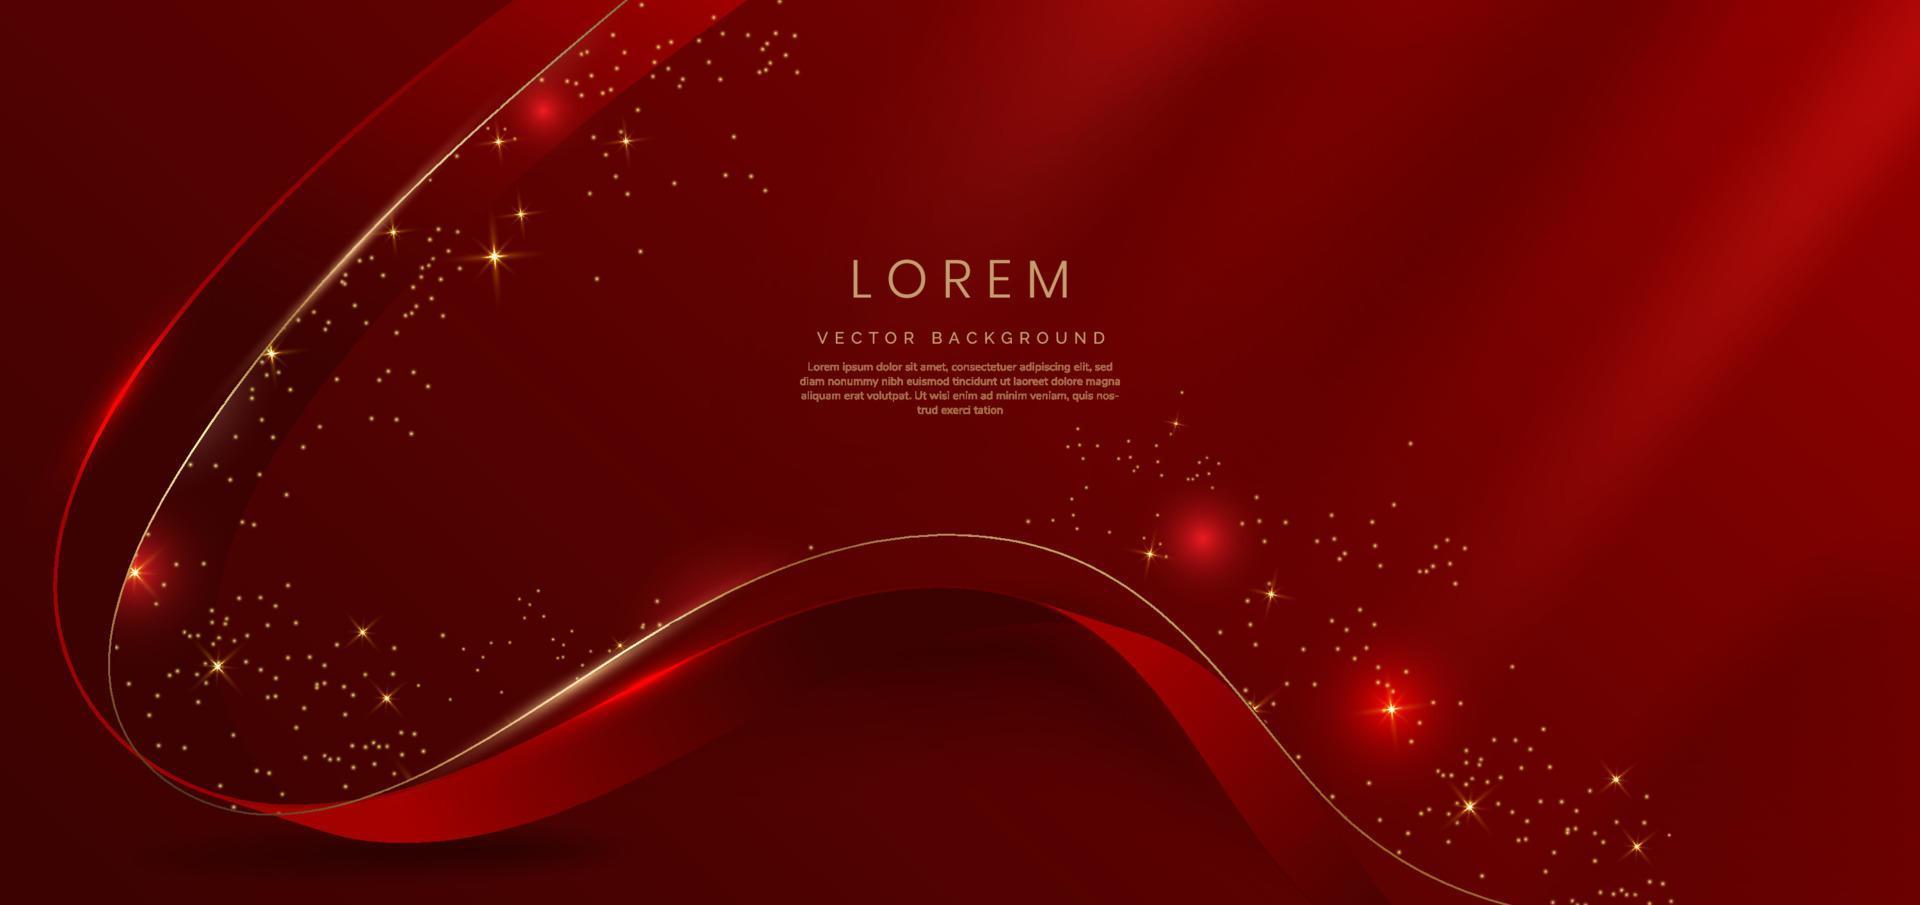 Abstract 3d gold curved red ribbon on red background with lighting effect and sparkle with copy space for text. Luxury design style. vector